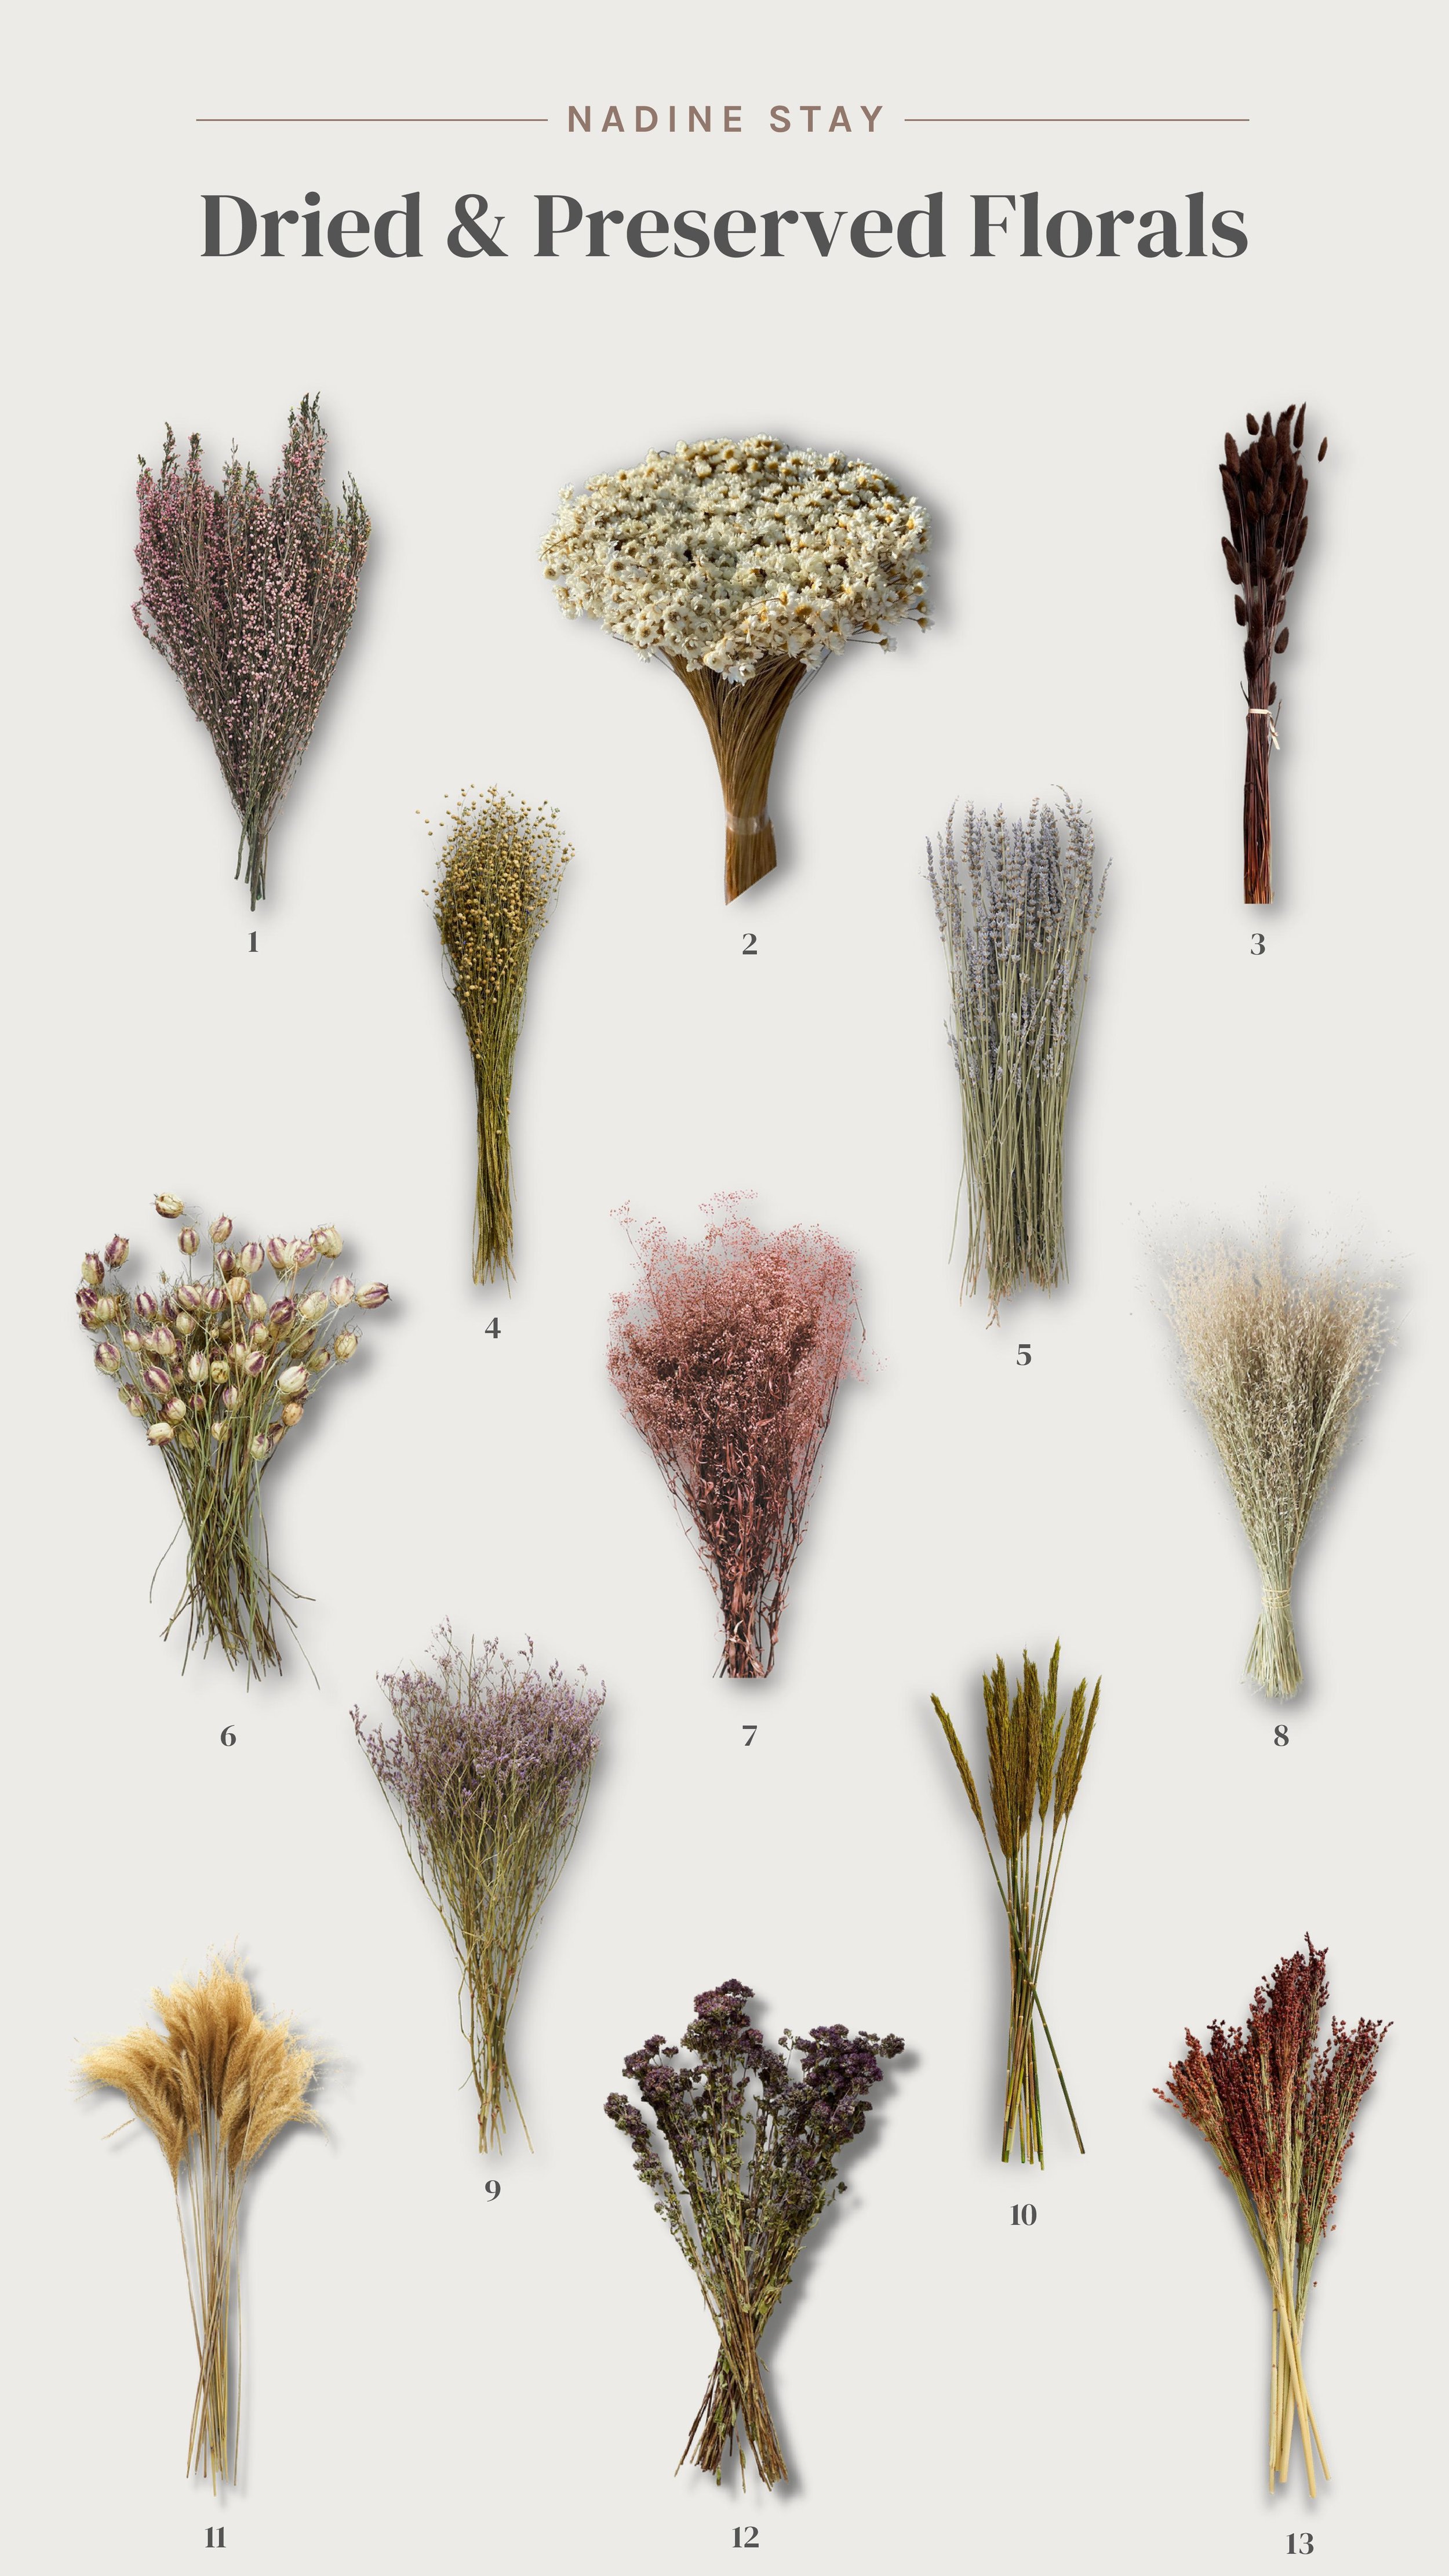 Swapping faux florals for dried florals and a roundup of my favorite dried and preserved flowers and stems. Dried flax, star flowers, lavender, heather flowers, grasses, spring, summer, and fall dried stems | Nadine Stay